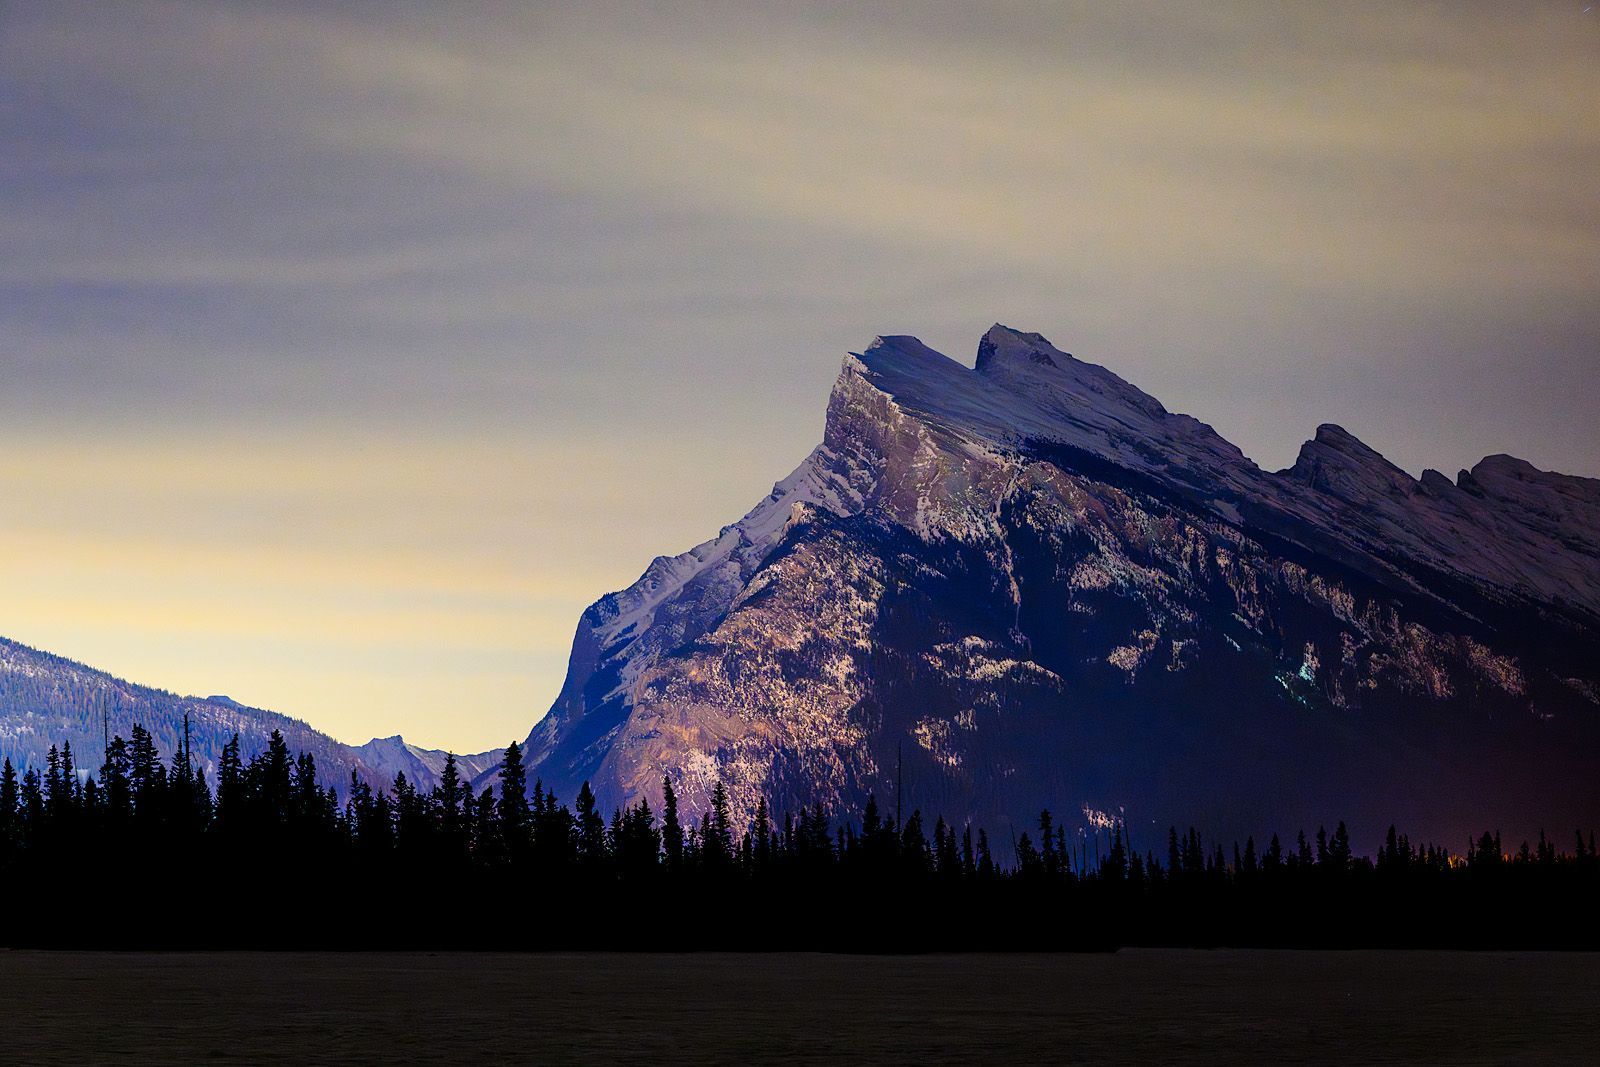 Mt Rundle as seen at night.